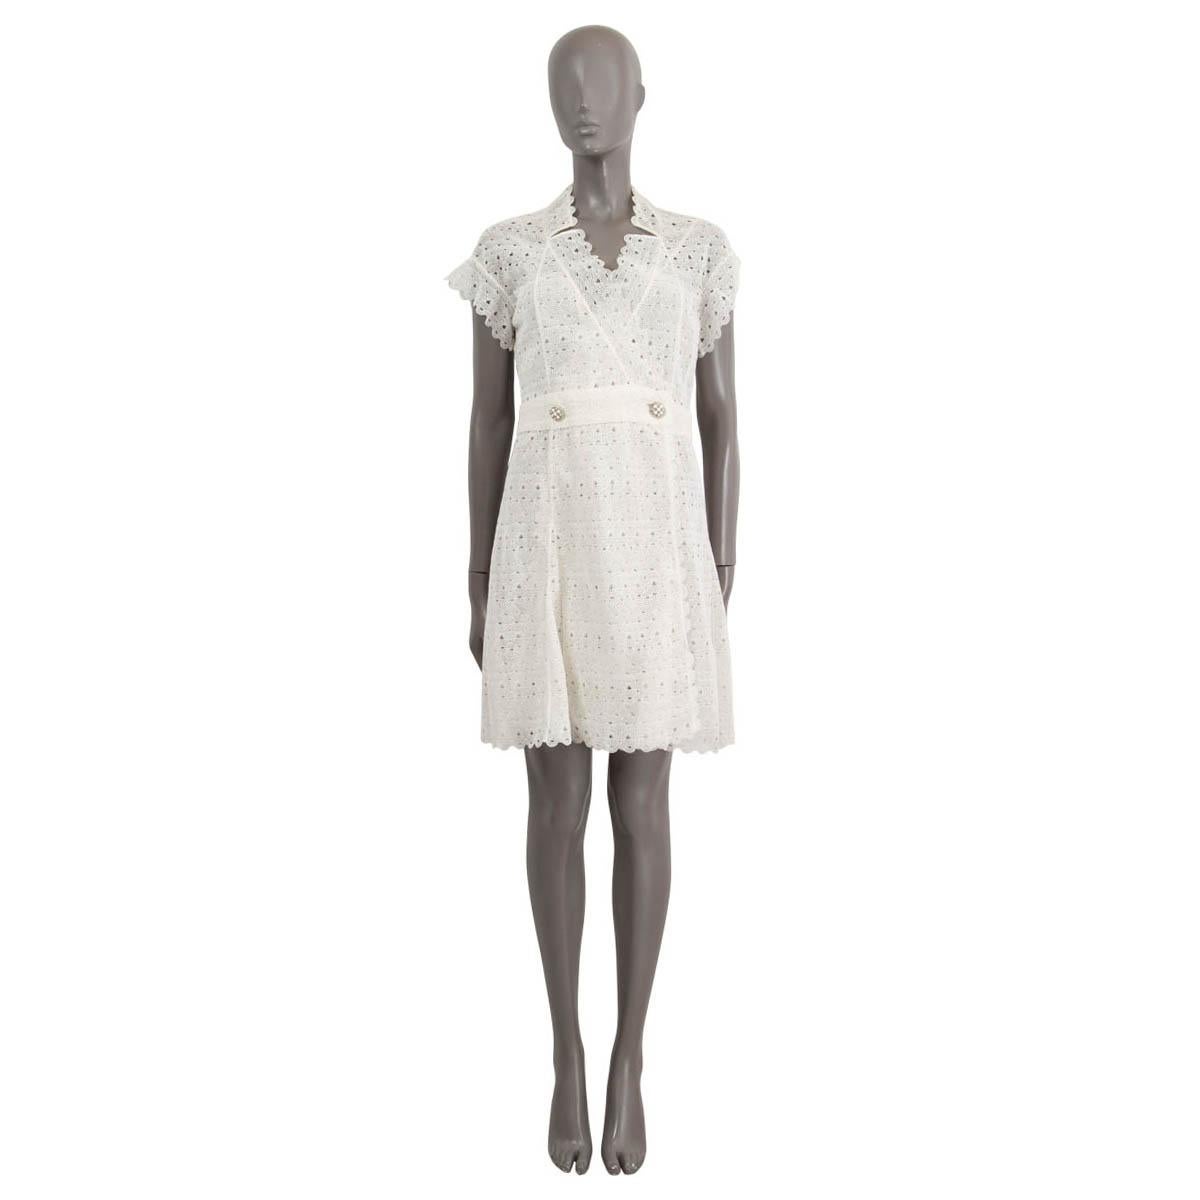 100% authentic Chanel crochet wrap dress in white cotton (100%). Opens with two Gripoix stone embellished buttons on the front. Features short sleeves and V-neck. Comes with slip dress in silk (100%) with lace trim along the hemline. Has been worn